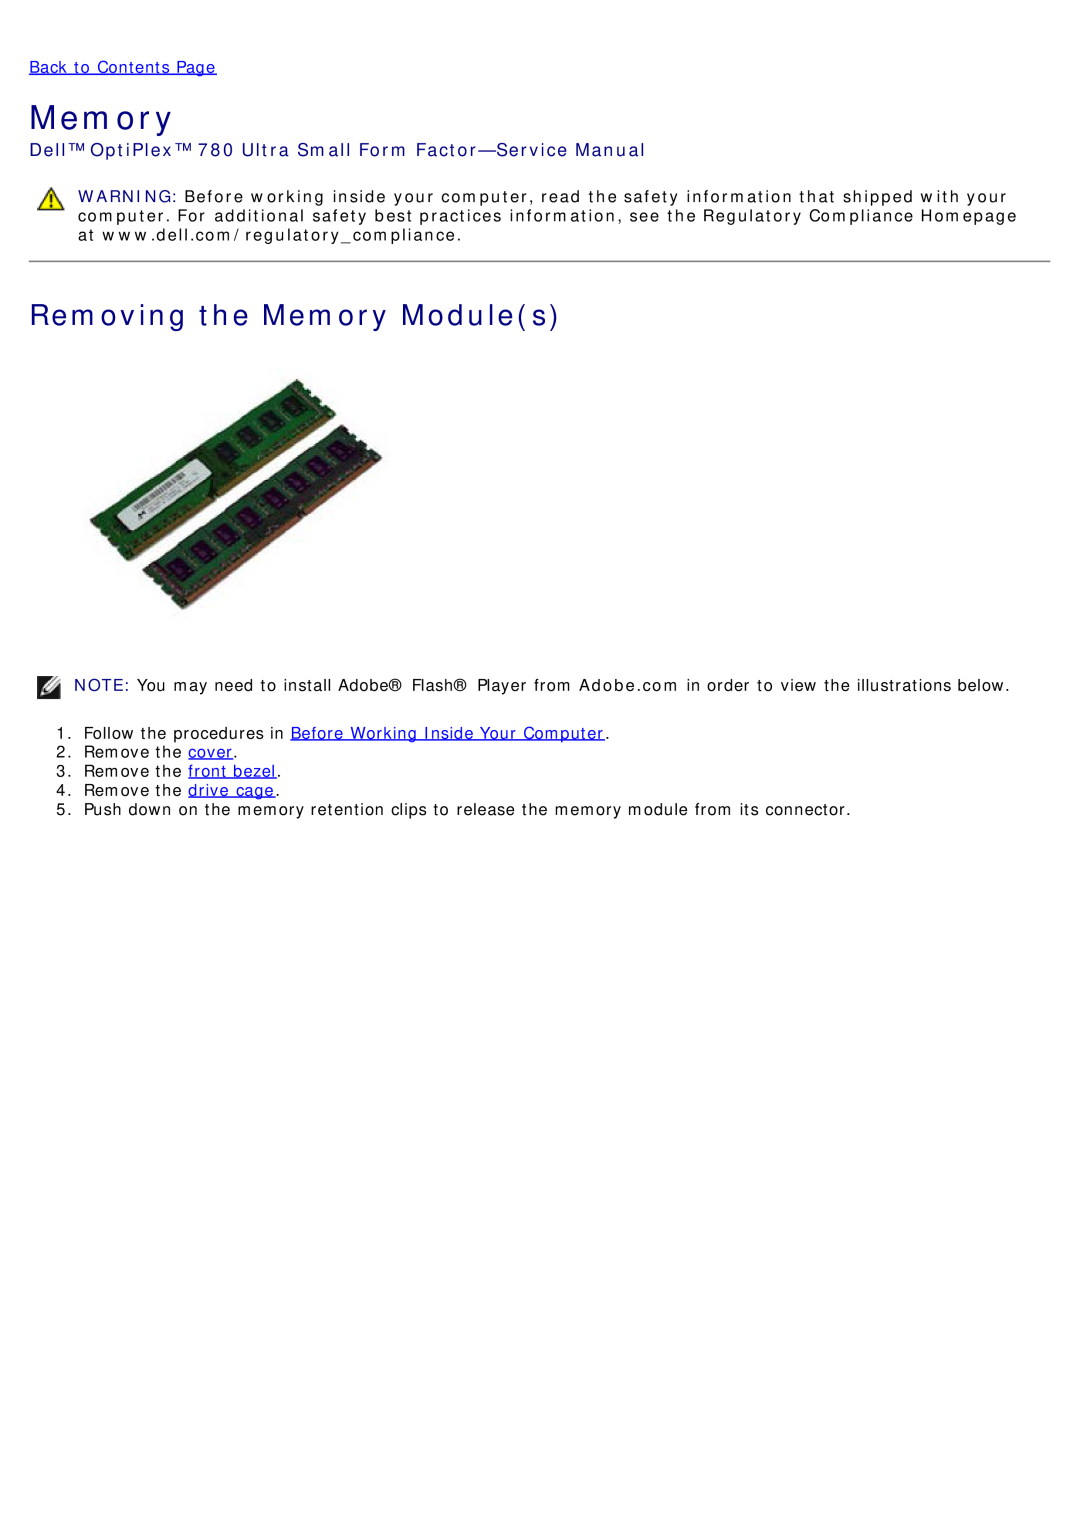 Dell Removing the Memory Modules, Dell OptiPlex 780 Ultra Small Form Factor-Service Manual, Back to Contents Page 